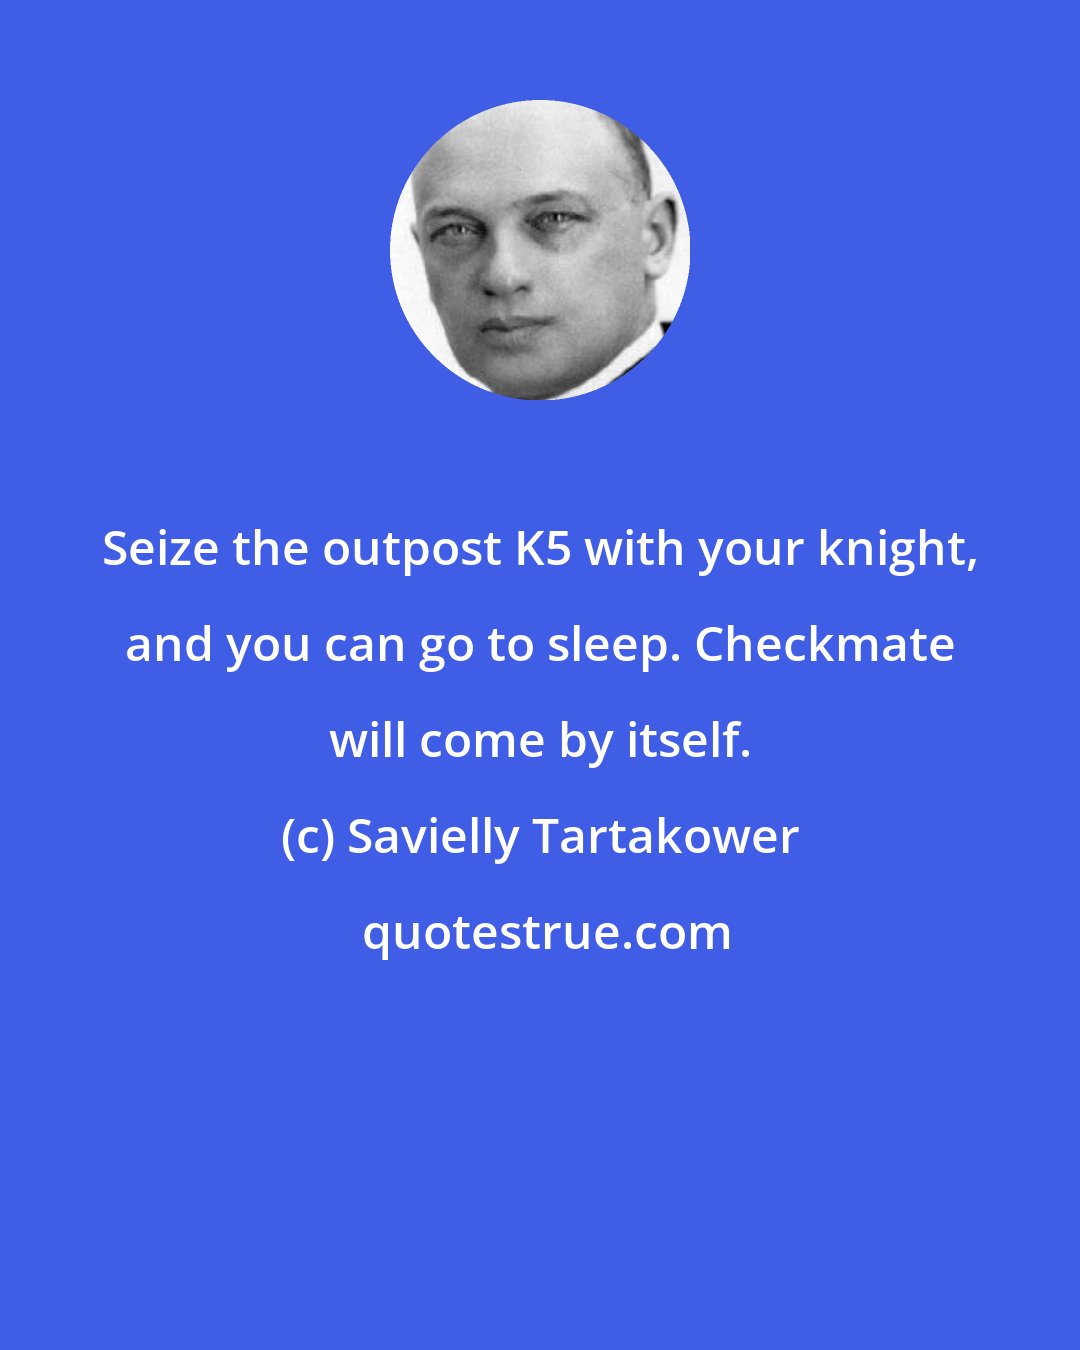 Savielly Tartakower: Seize the outpost K5 with your knight, and you can go to sleep. Checkmate will come by itself.